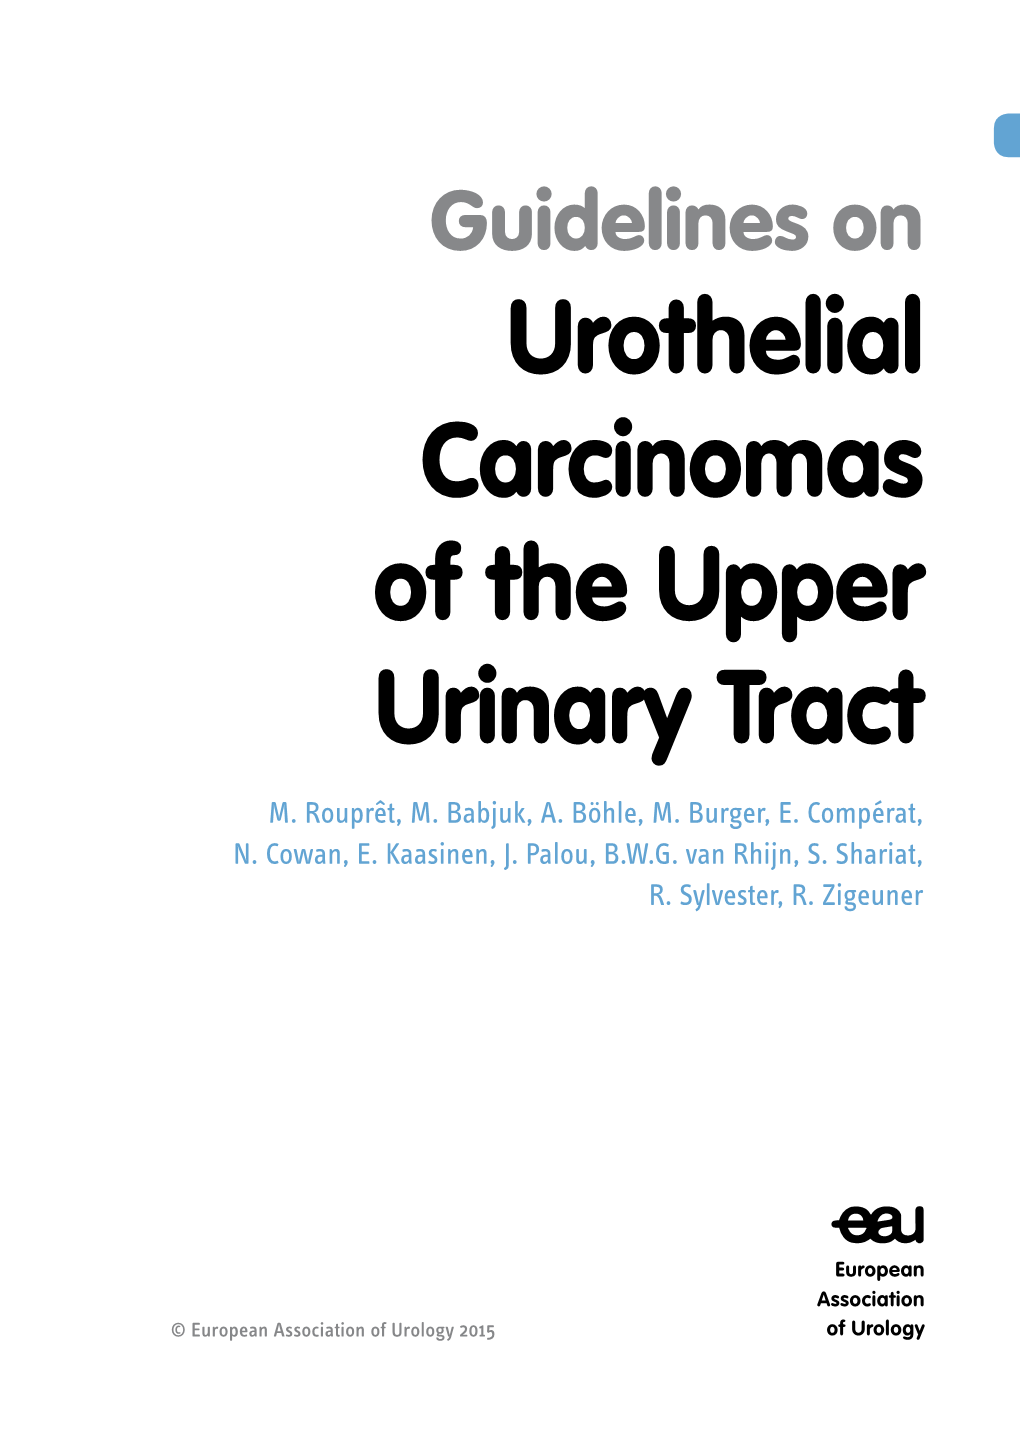 Urothelial Carcinomas of the Upper Urinary Tract